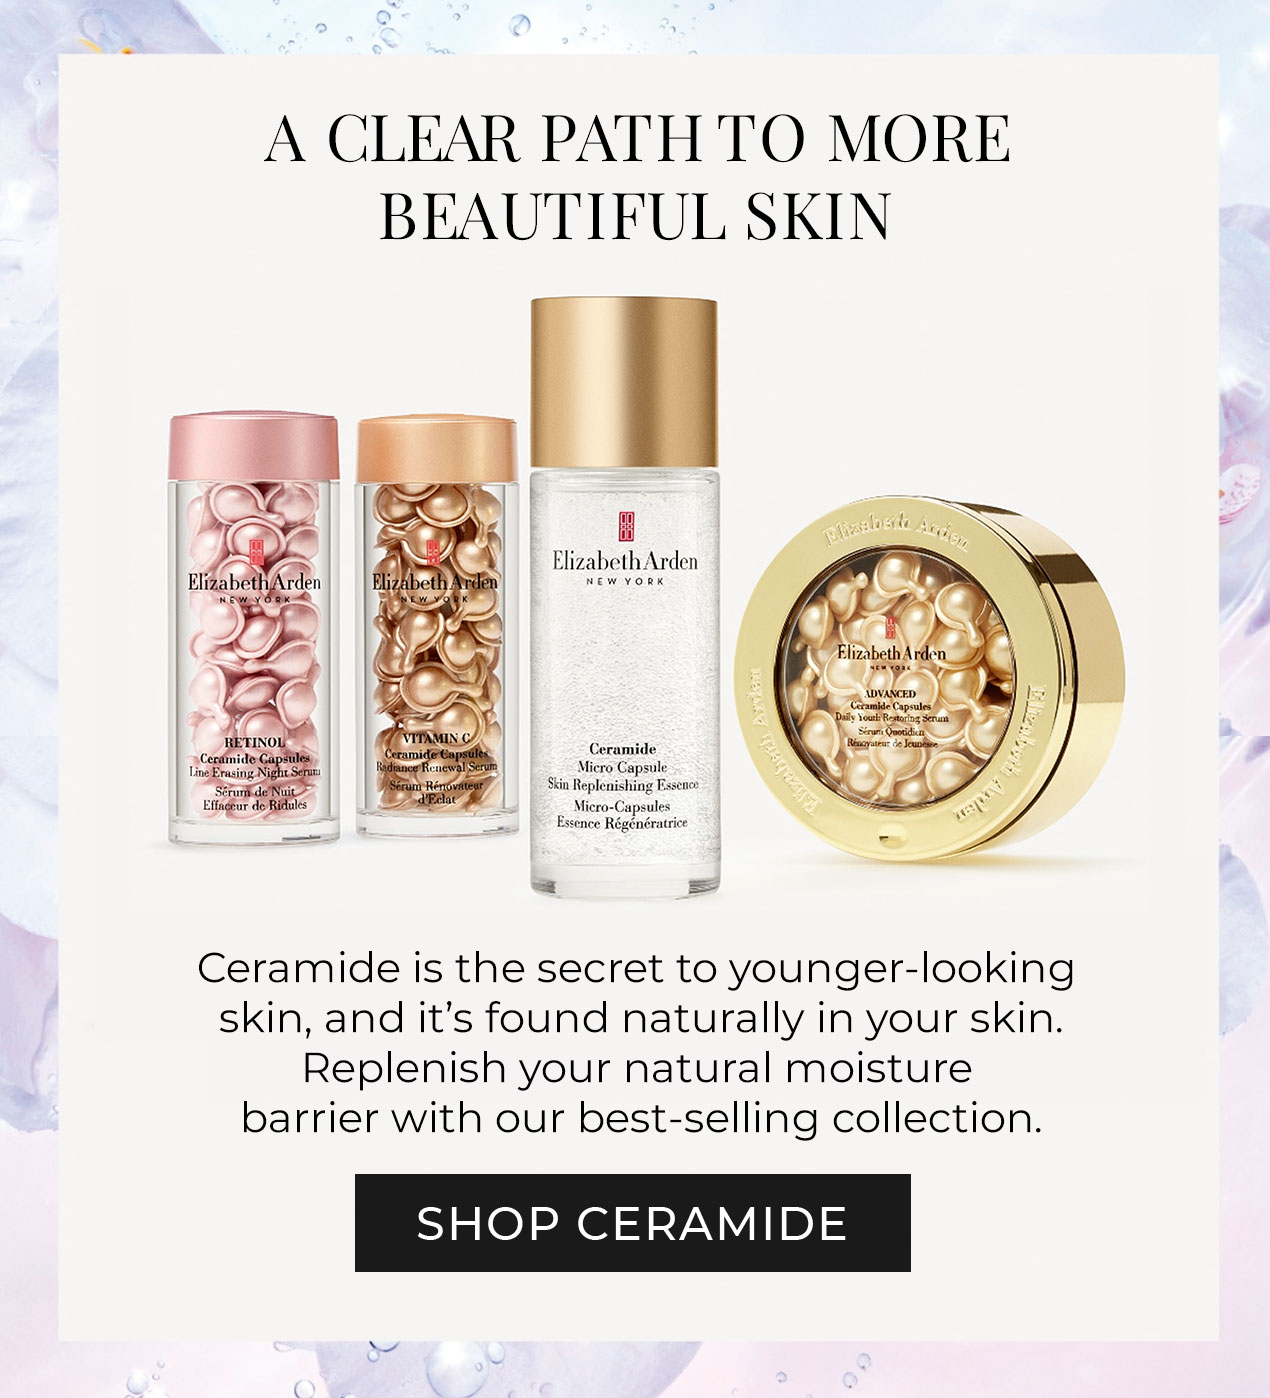 A clear path to more beautiful skin | Ceramide is the secret to younger-looking skin, and it''s found naturally in your skin. Replenish your natural moisture barrier with our best-selling skin collection. | Shop Ceramide